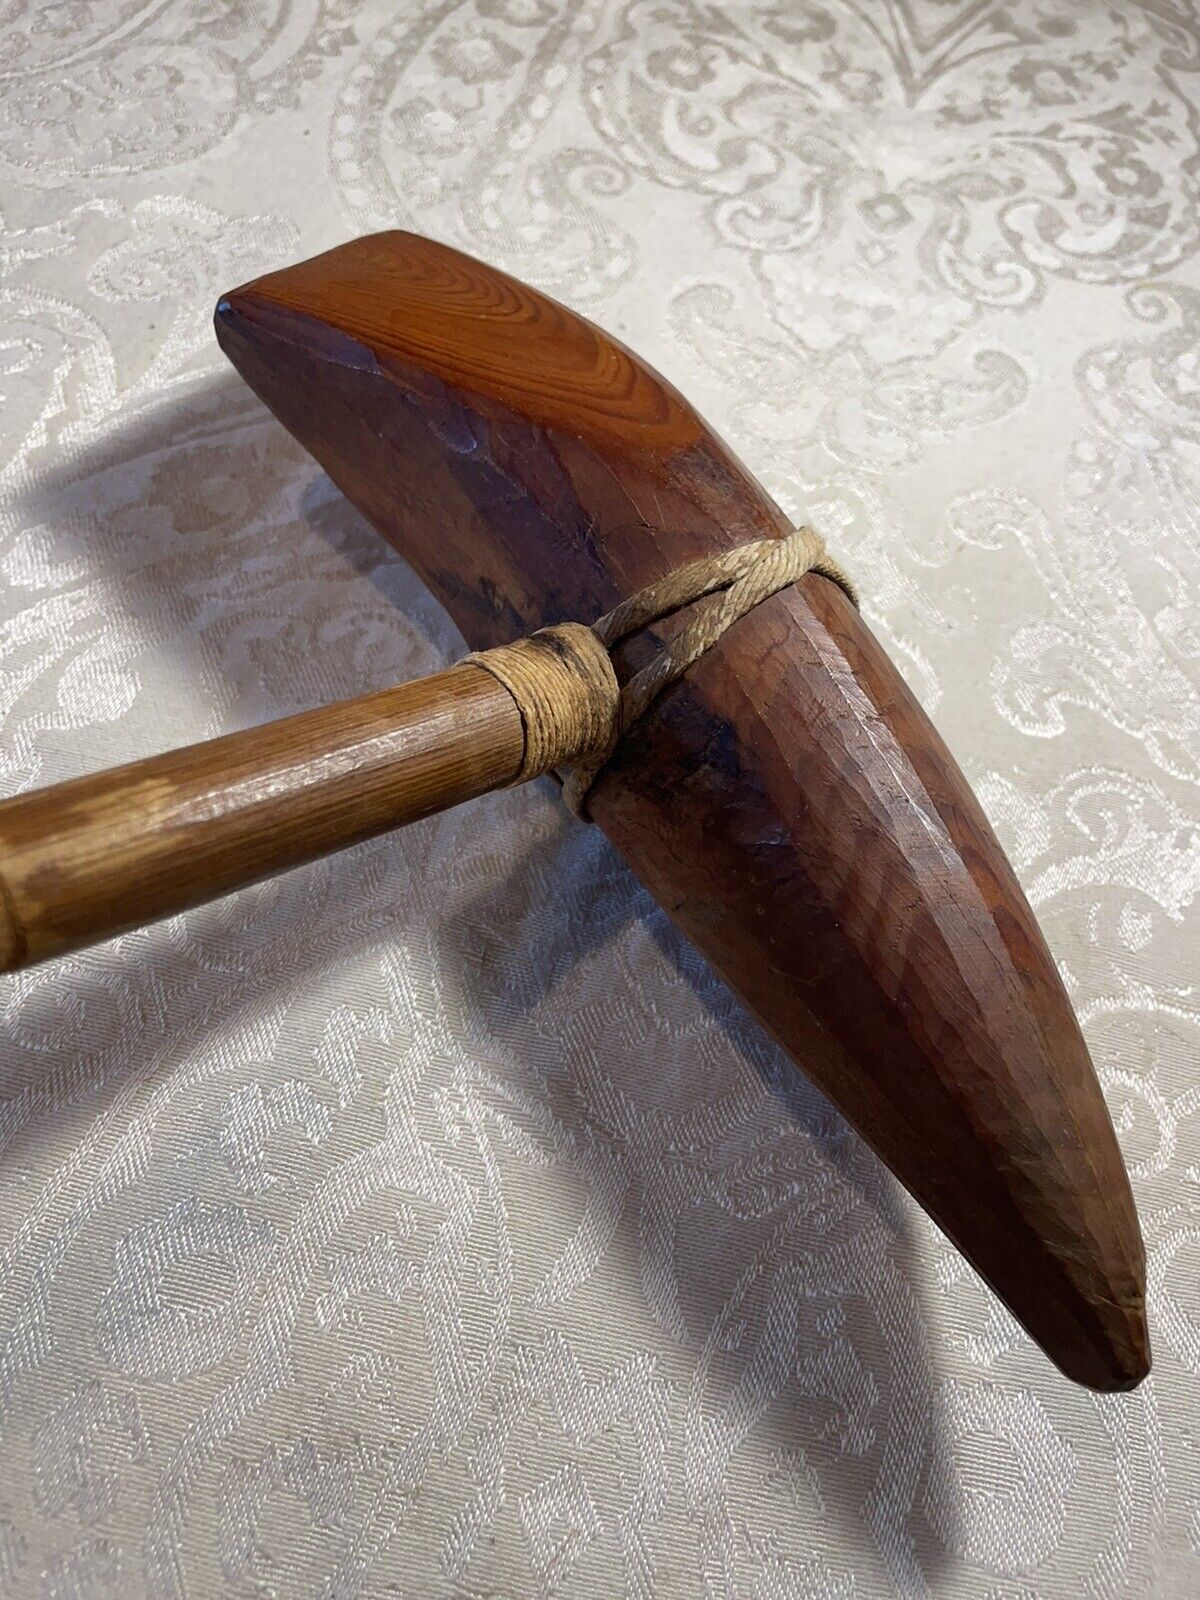 Wooden Axe Head And Handl